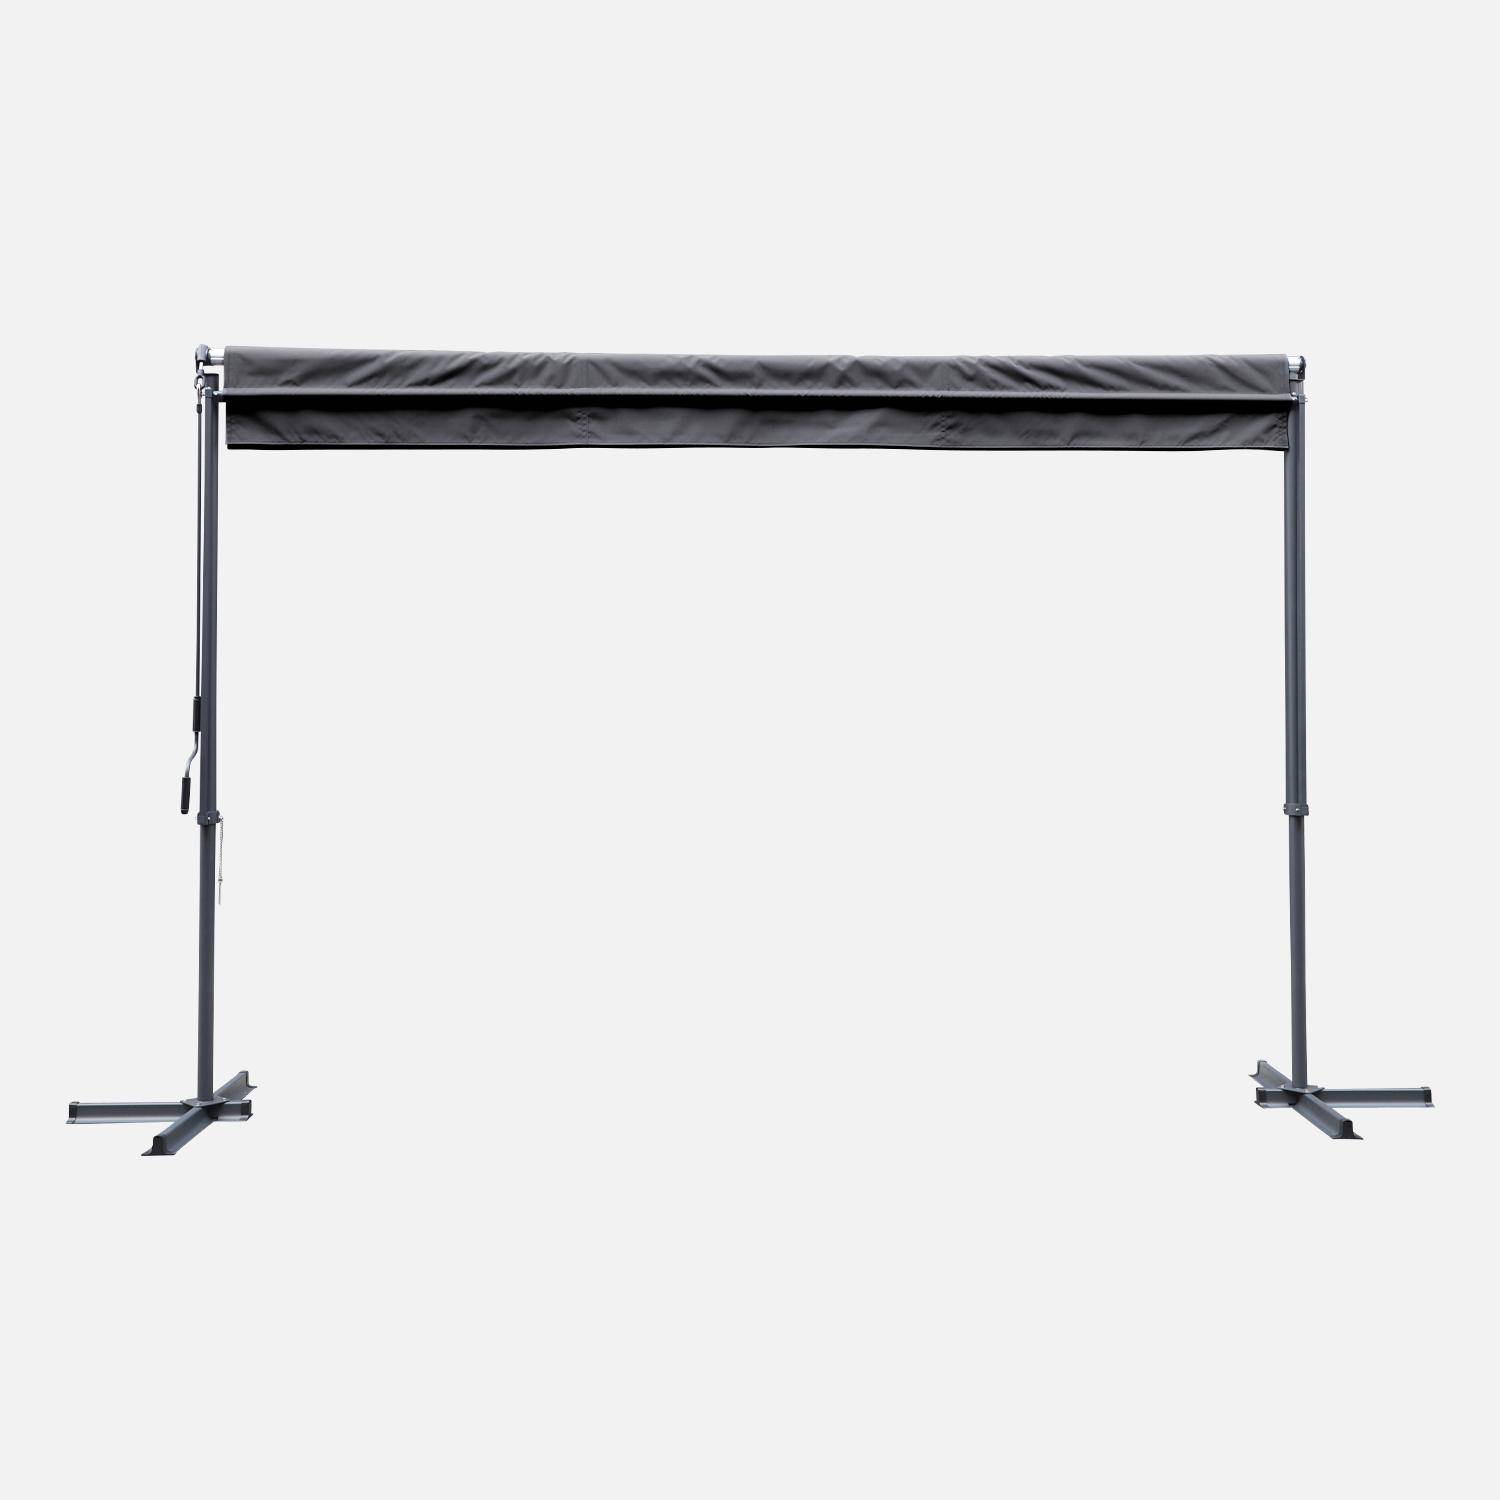 Rectractable patio awning - Manual crank system, freestanding awning, coated polyester canvas - Penne 4x3m - Grey Photo2